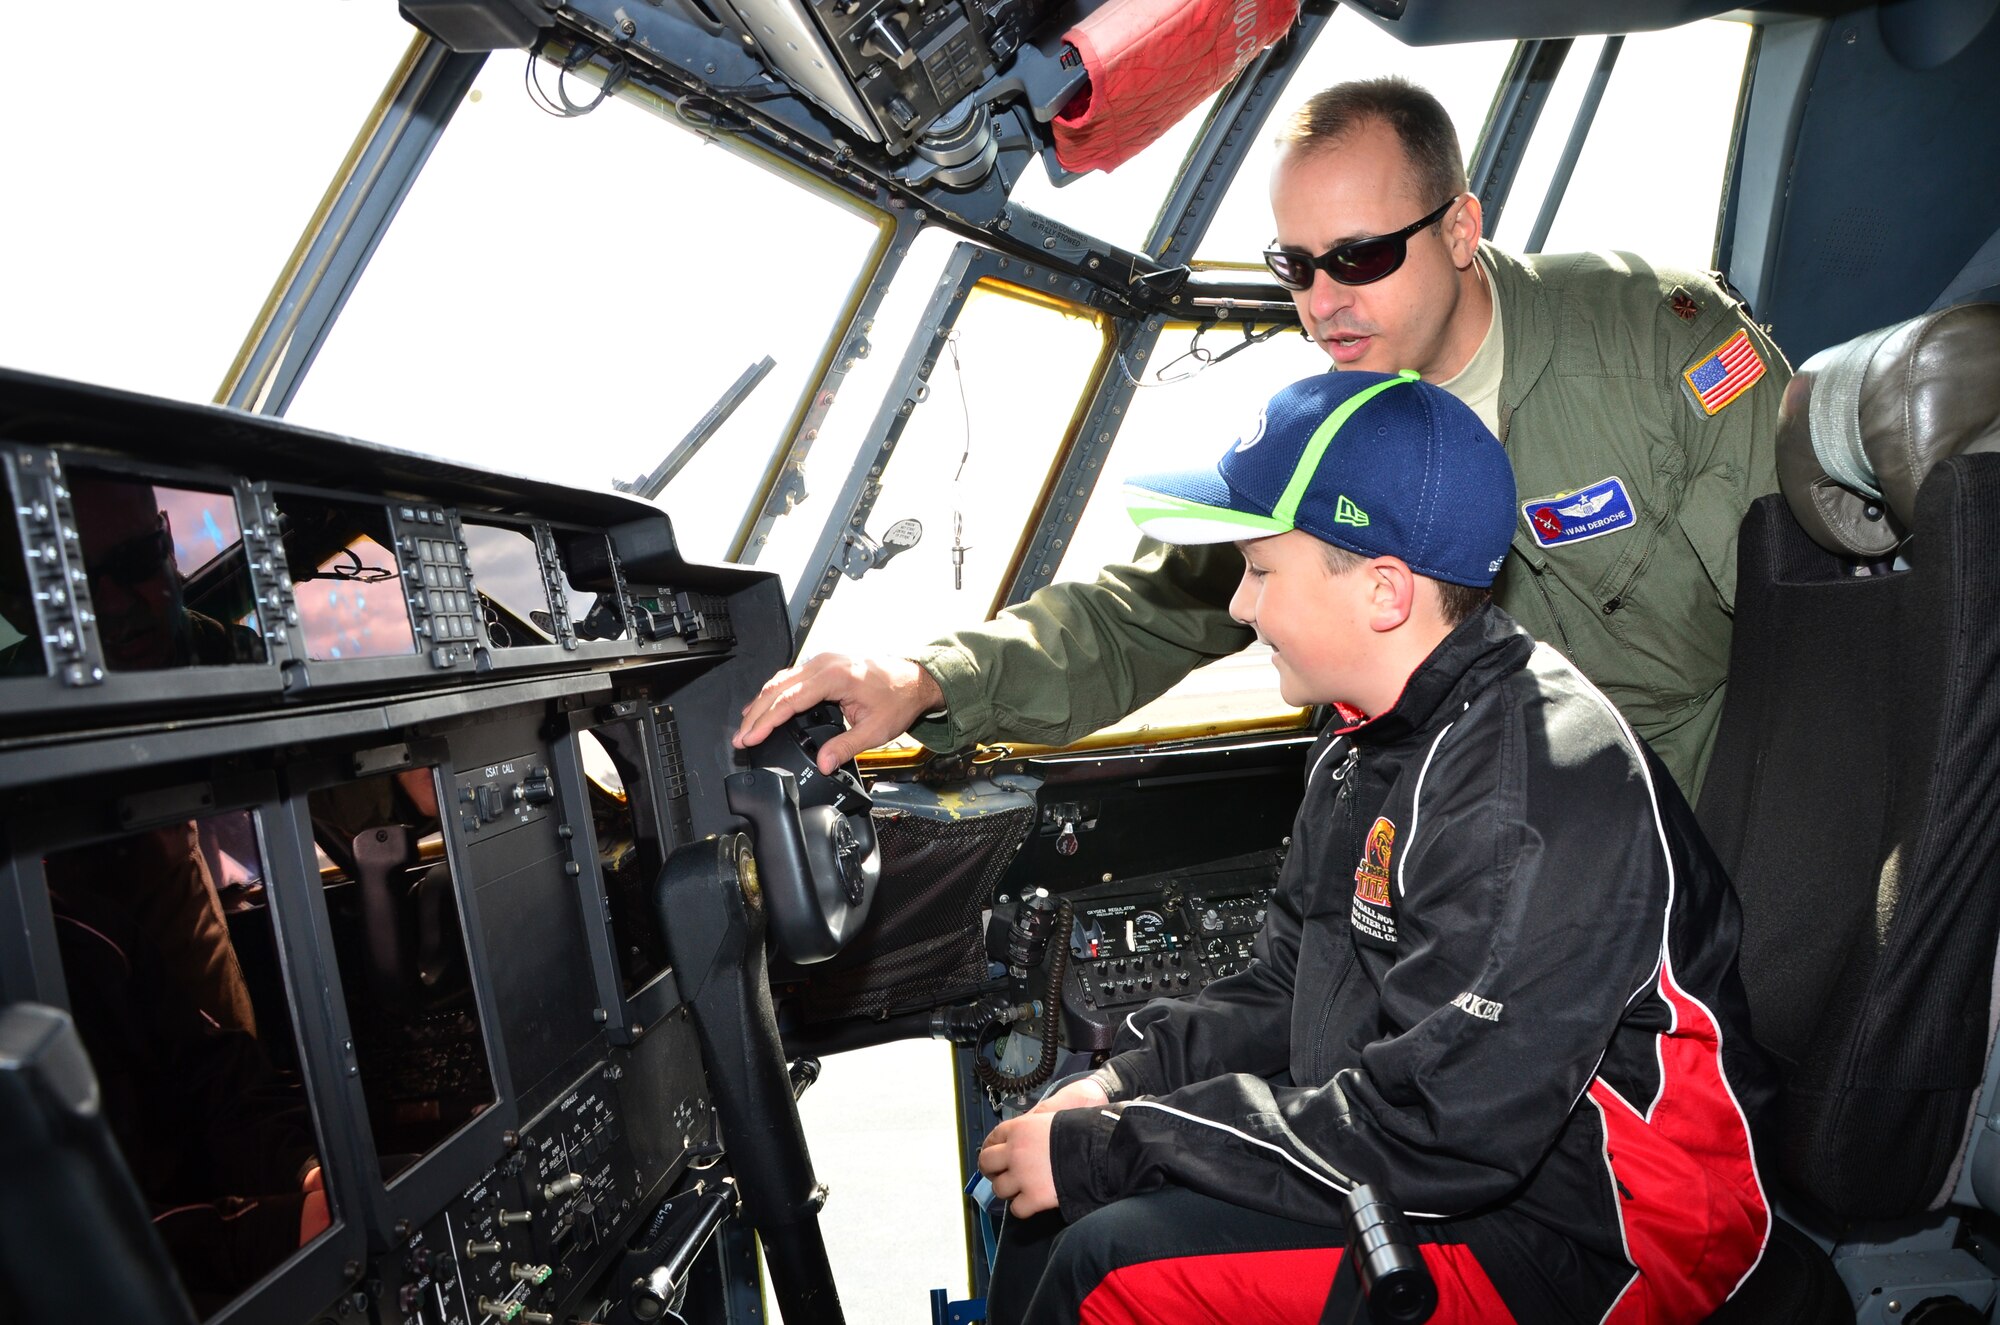 Maj. Ivan DeRoche, a pilot with the 53rd Weather Reconnaissance Squadron Hurricane Hunters, explains the flight controls to a young visitor during the Halifax, Nova Scotia stop of the 2015 Hurricane Awareness Tour May 3. (U.S. Air Force photo/Master Sgt. Brian Lamar)